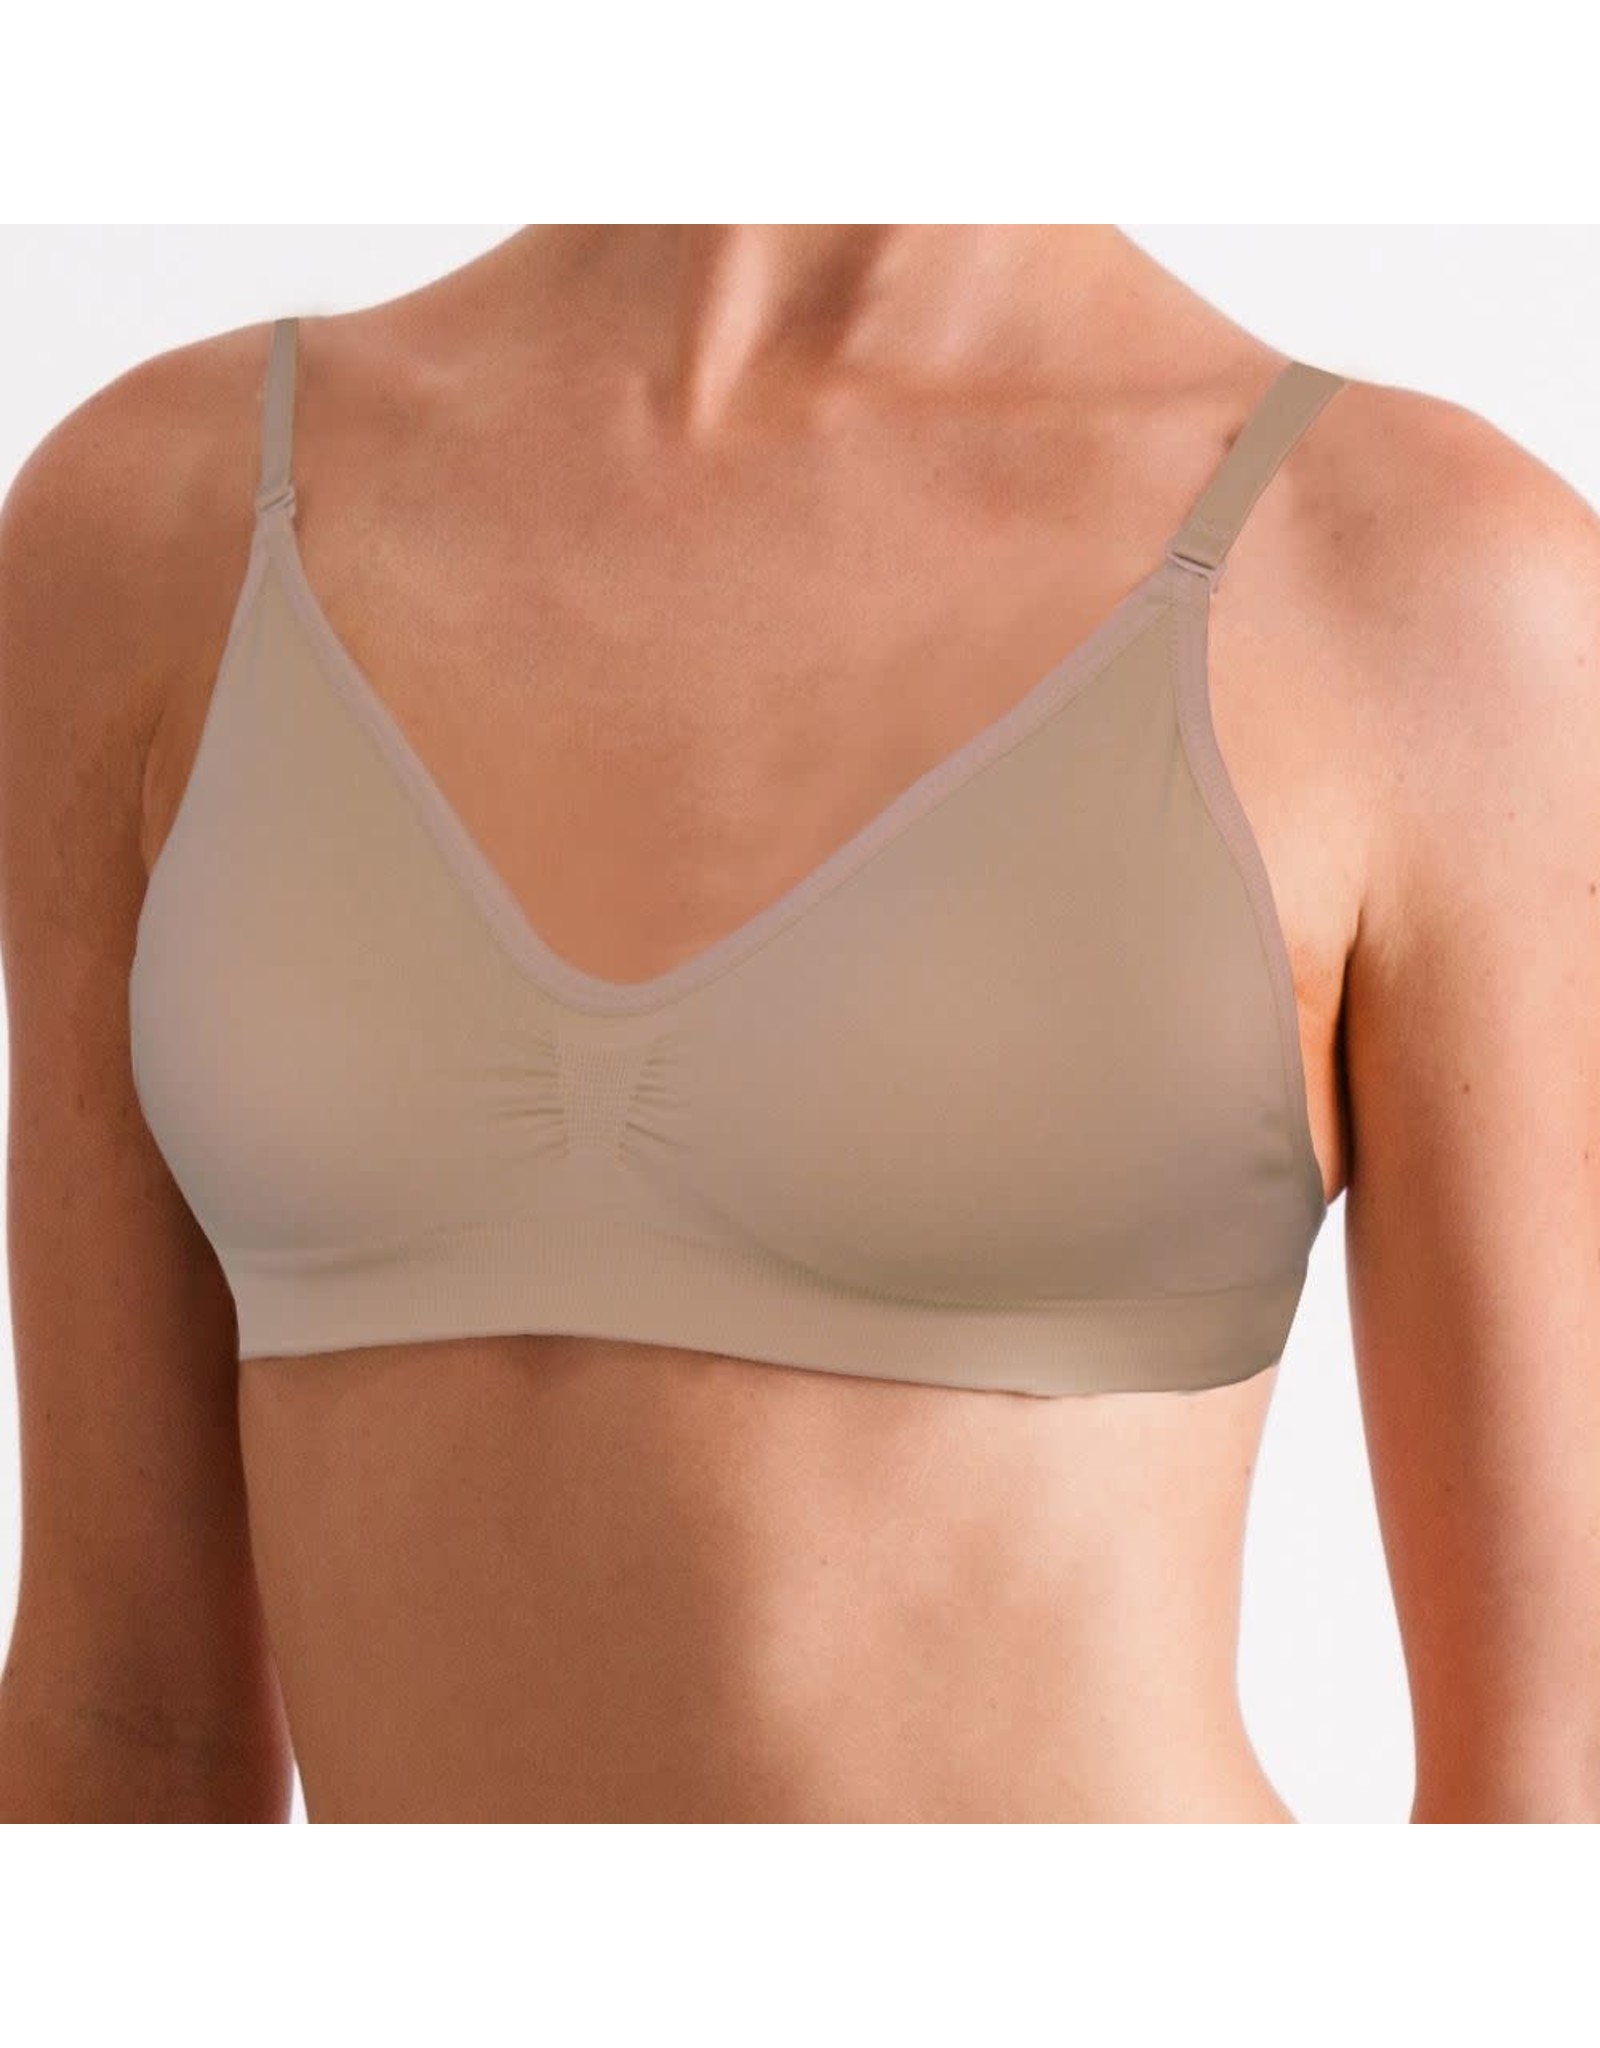 Invisible Camisole Body Liner by Silky Dance Legwear International